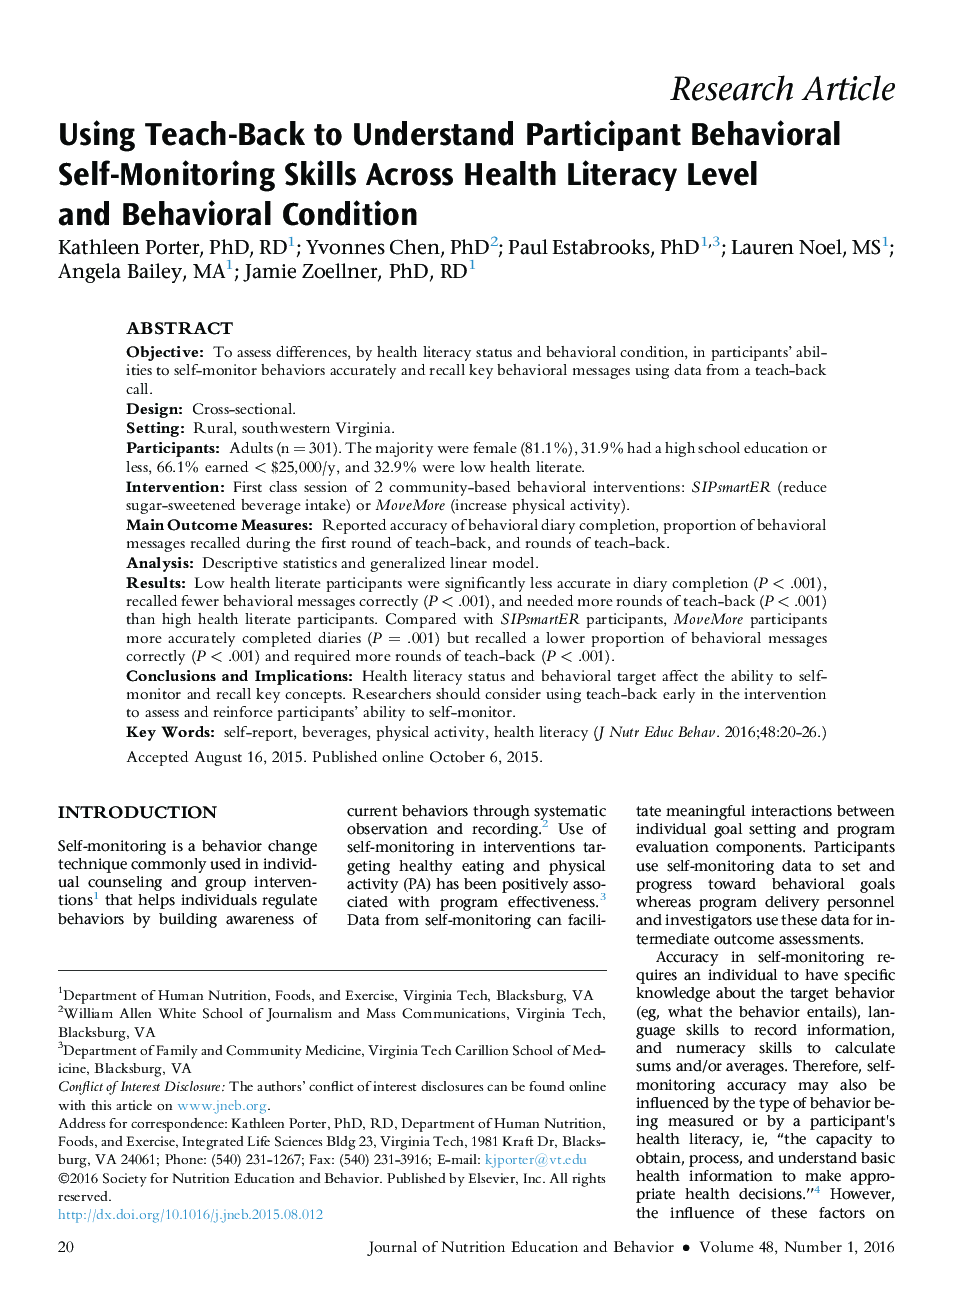 Using Teach-Back to Understand Participant Behavioral Self-Monitoring Skills Across Health Literacy Level andÂ Behavioral Condition